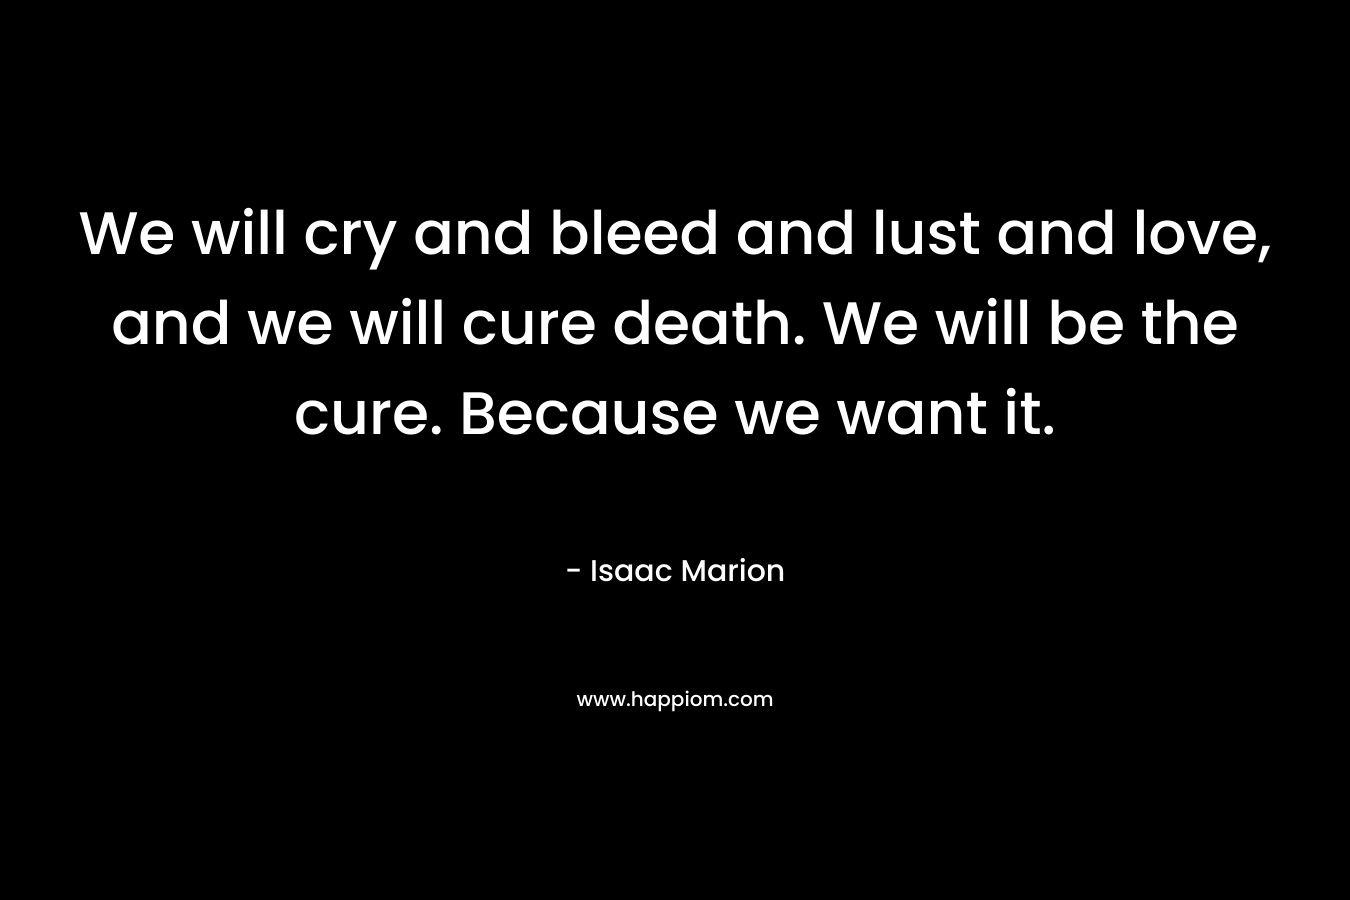 We will cry and bleed and lust and love, and we will cure death. We will be the cure. Because we want it. – Isaac Marion